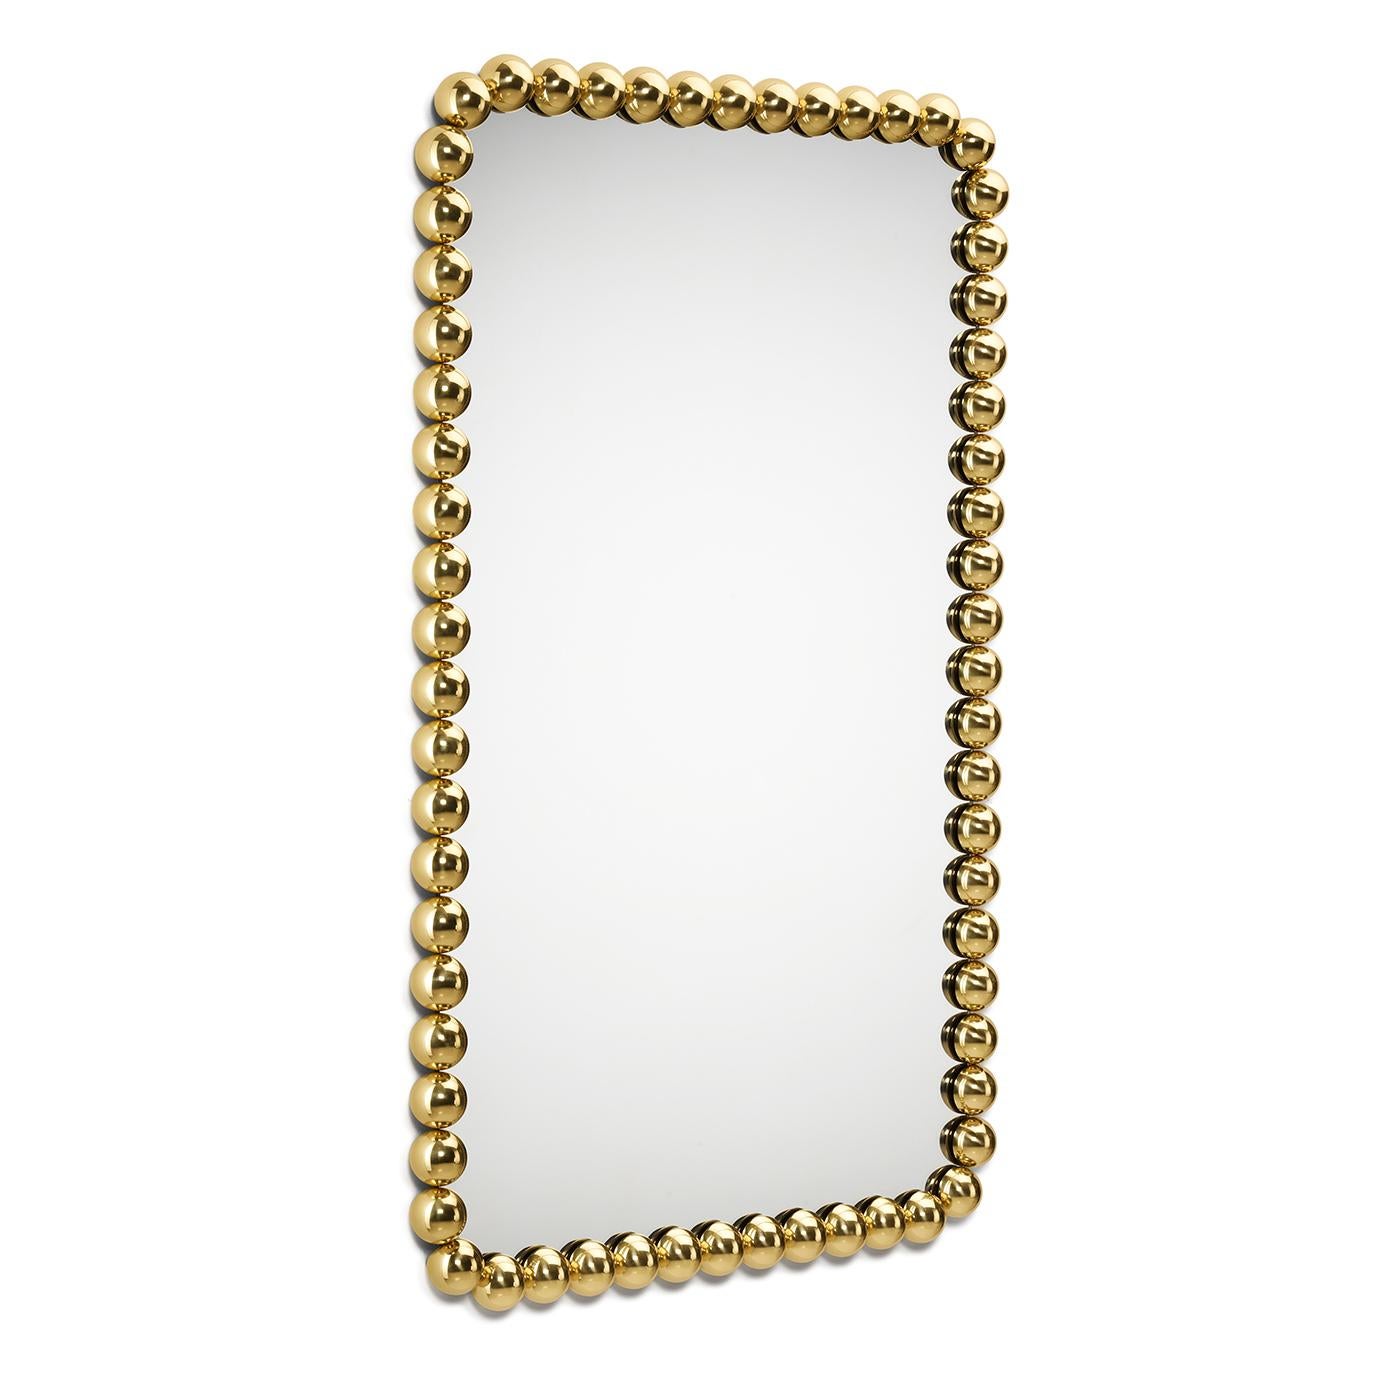 Placed above a bathroom sink, an accent table, or a vanity in luxe modern homes, this stylish mirror by Nika Zupanc will strike with its distinctive jewel-like allure. An array of golden-finished brass beads encircles the contours of the mirrored